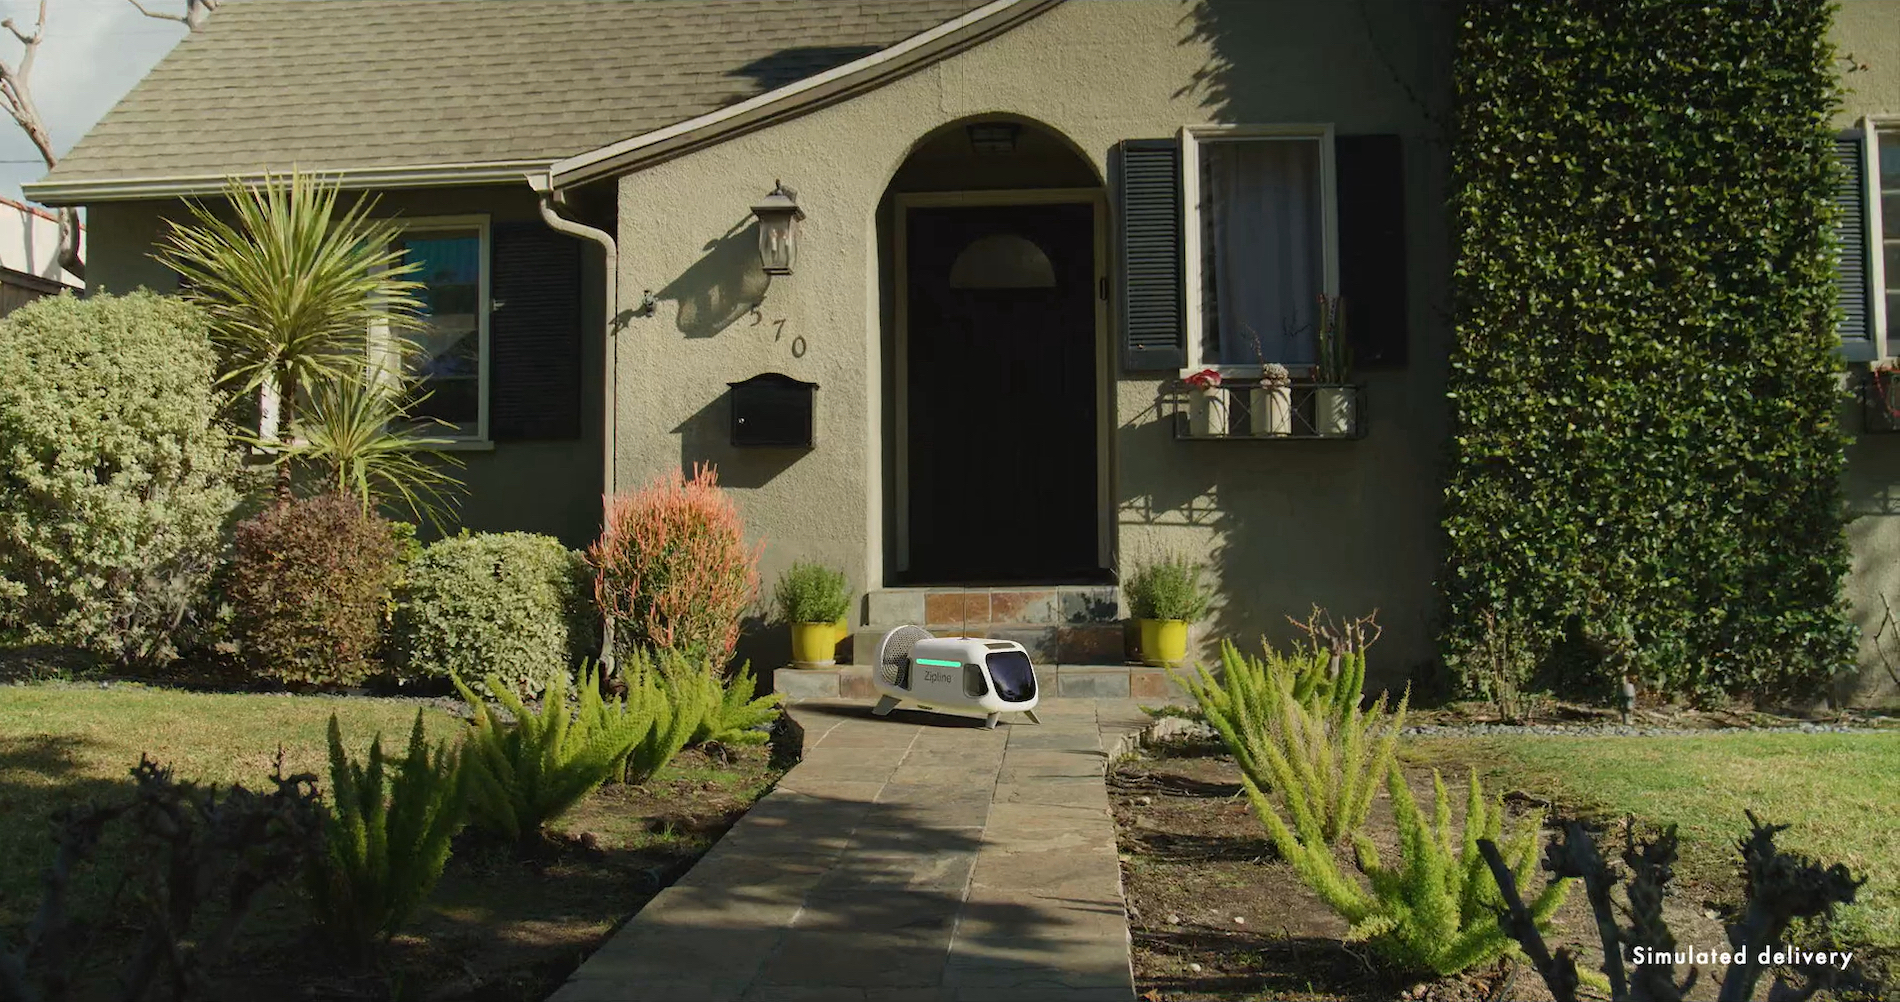 This drone company plans to make deliveries by lowering a small droid into your yard